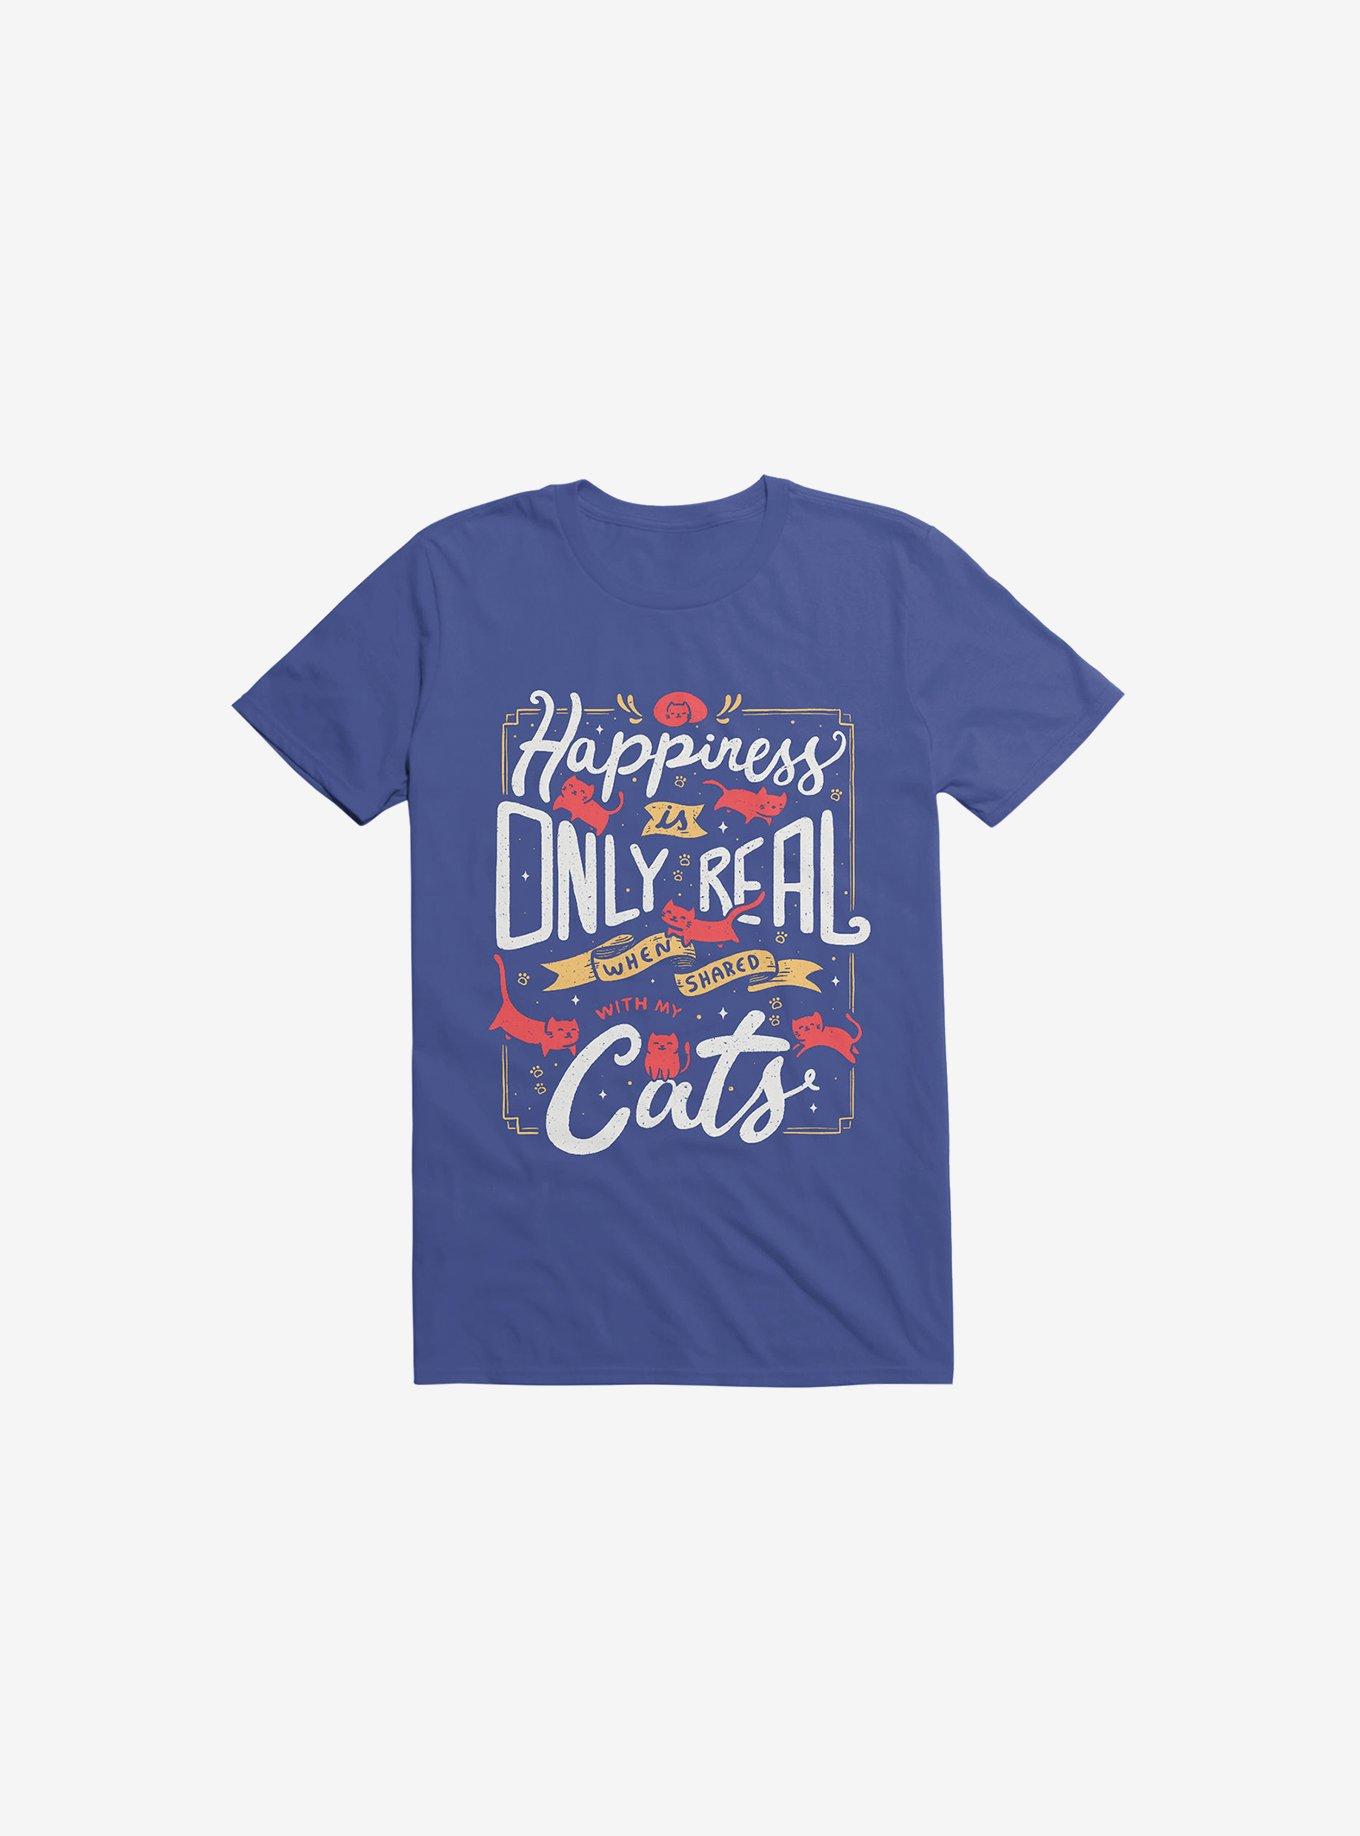 Happiness Is Only Real When Shared With My Cats Royal Blue T-Shirt